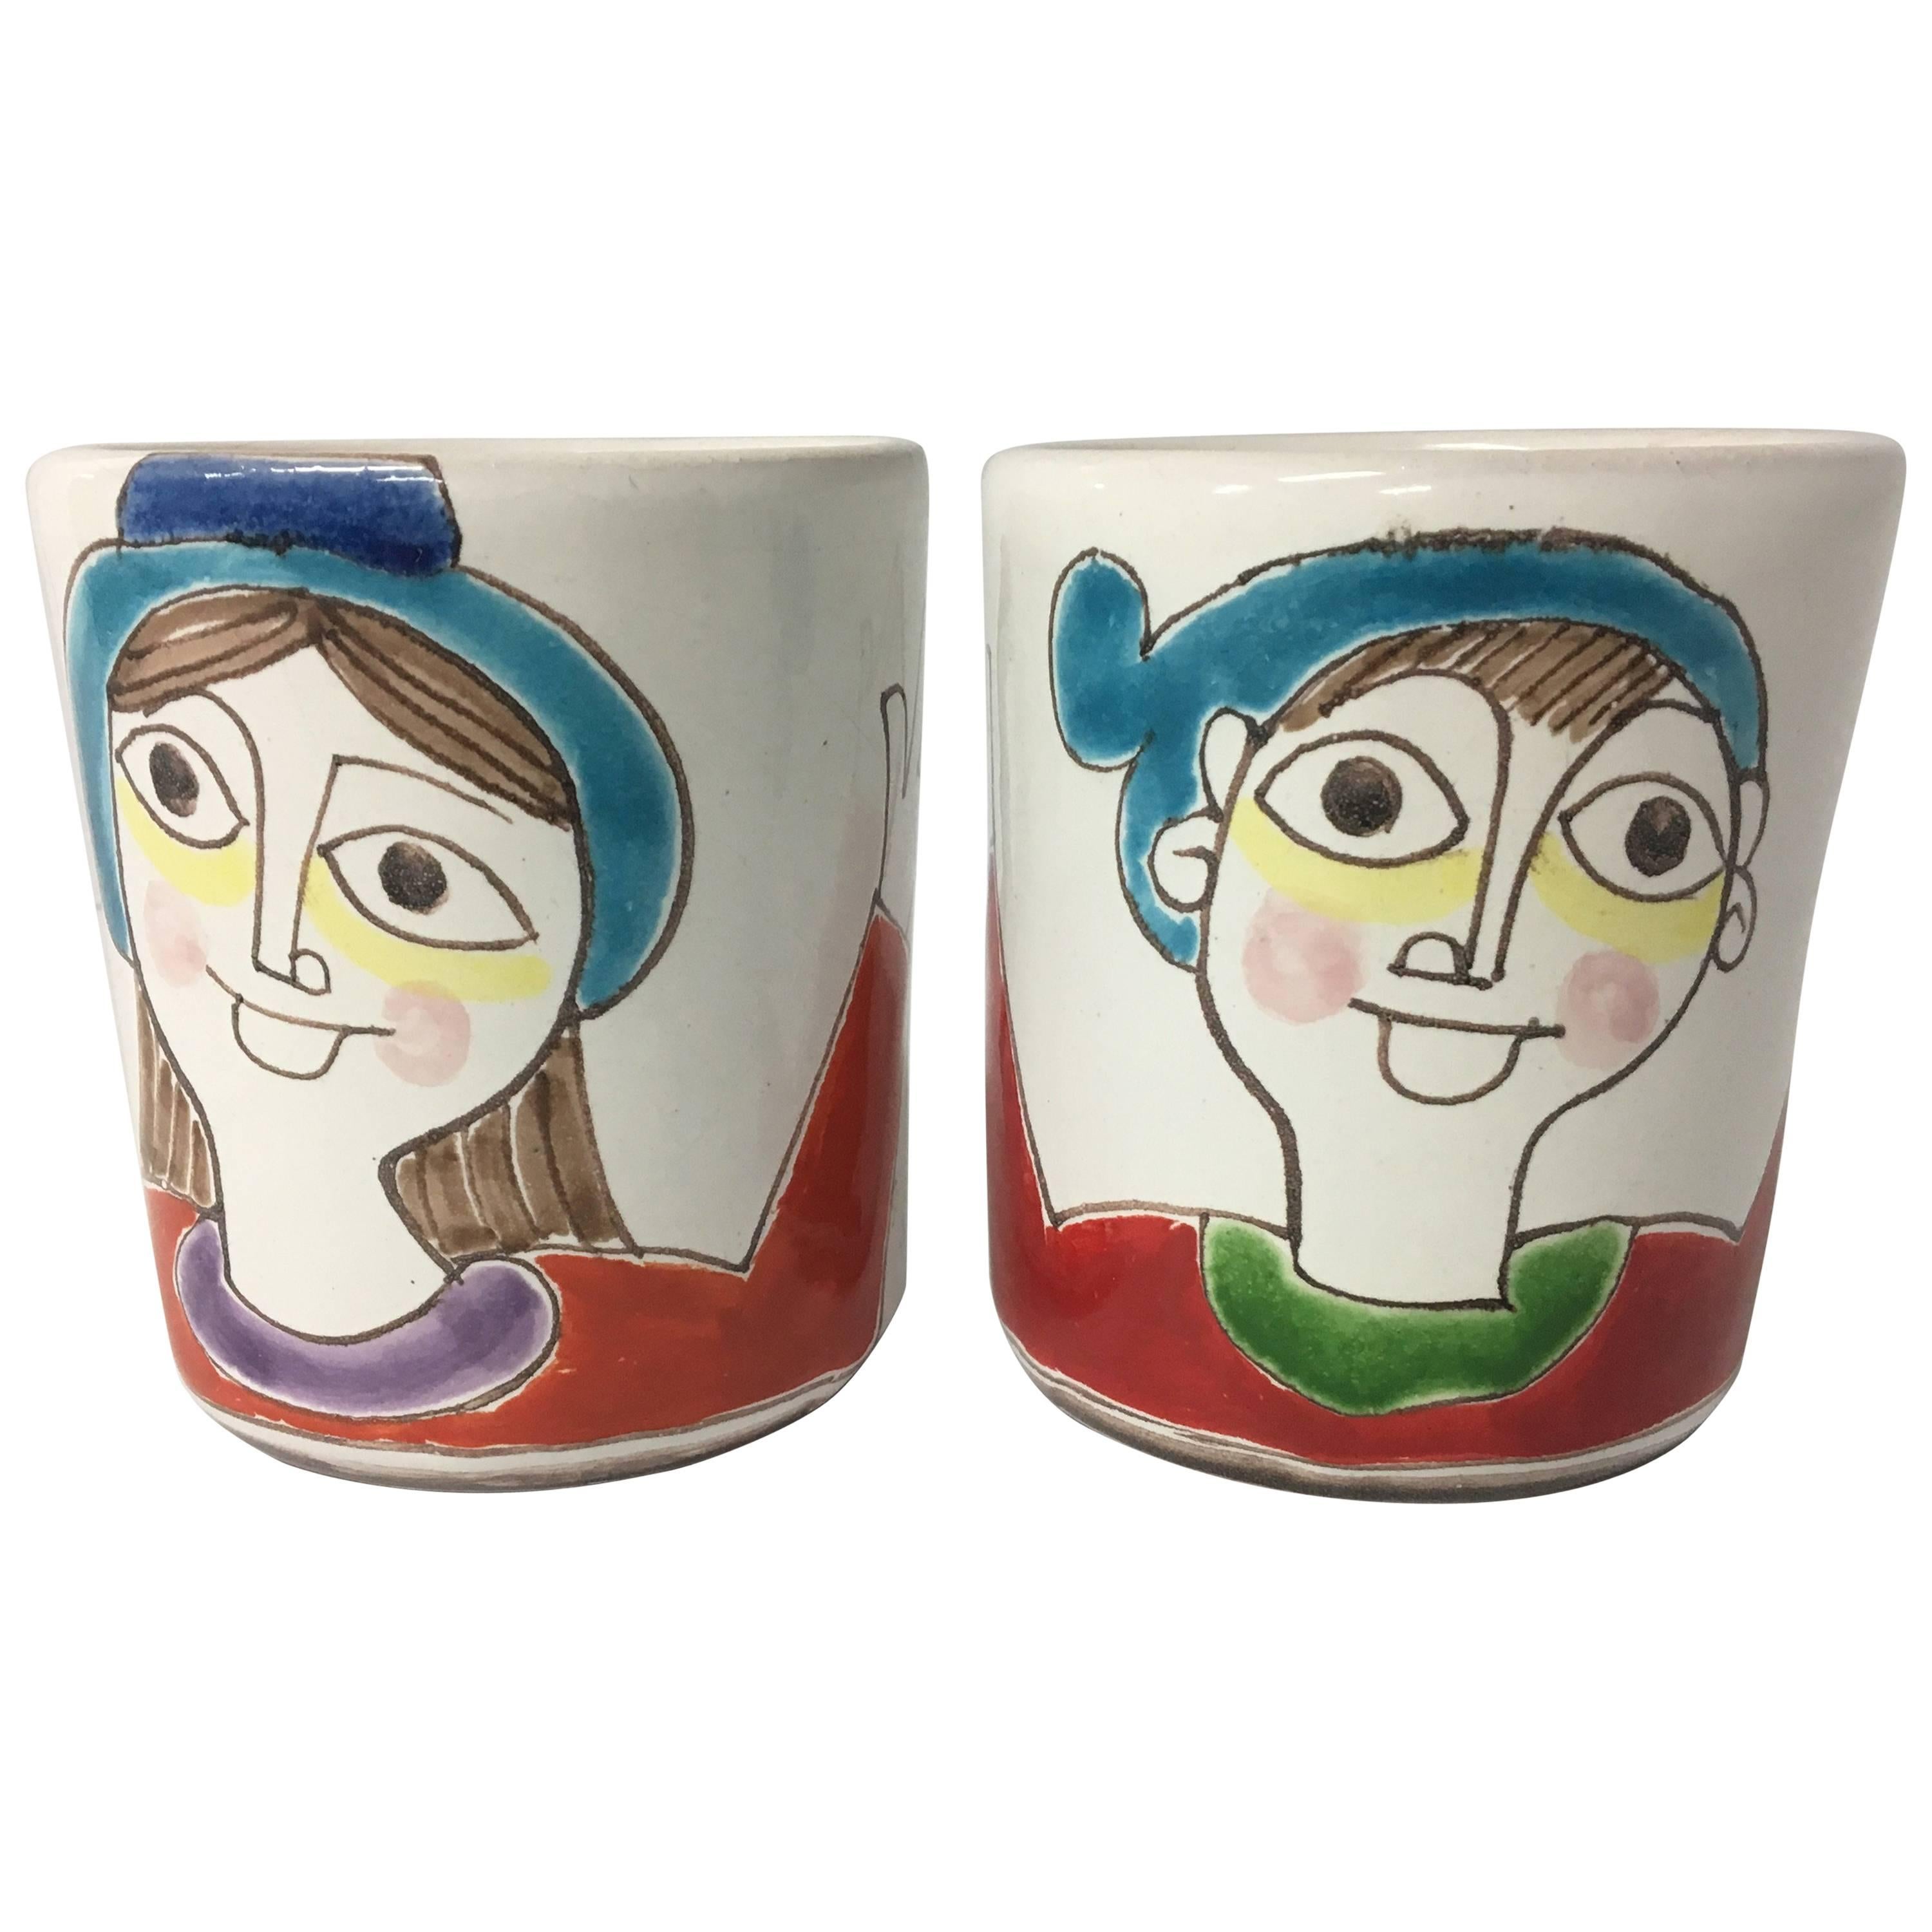 Beautiful Pair of His & Hers Hand-Painted Mugs by Giovanni Desimone